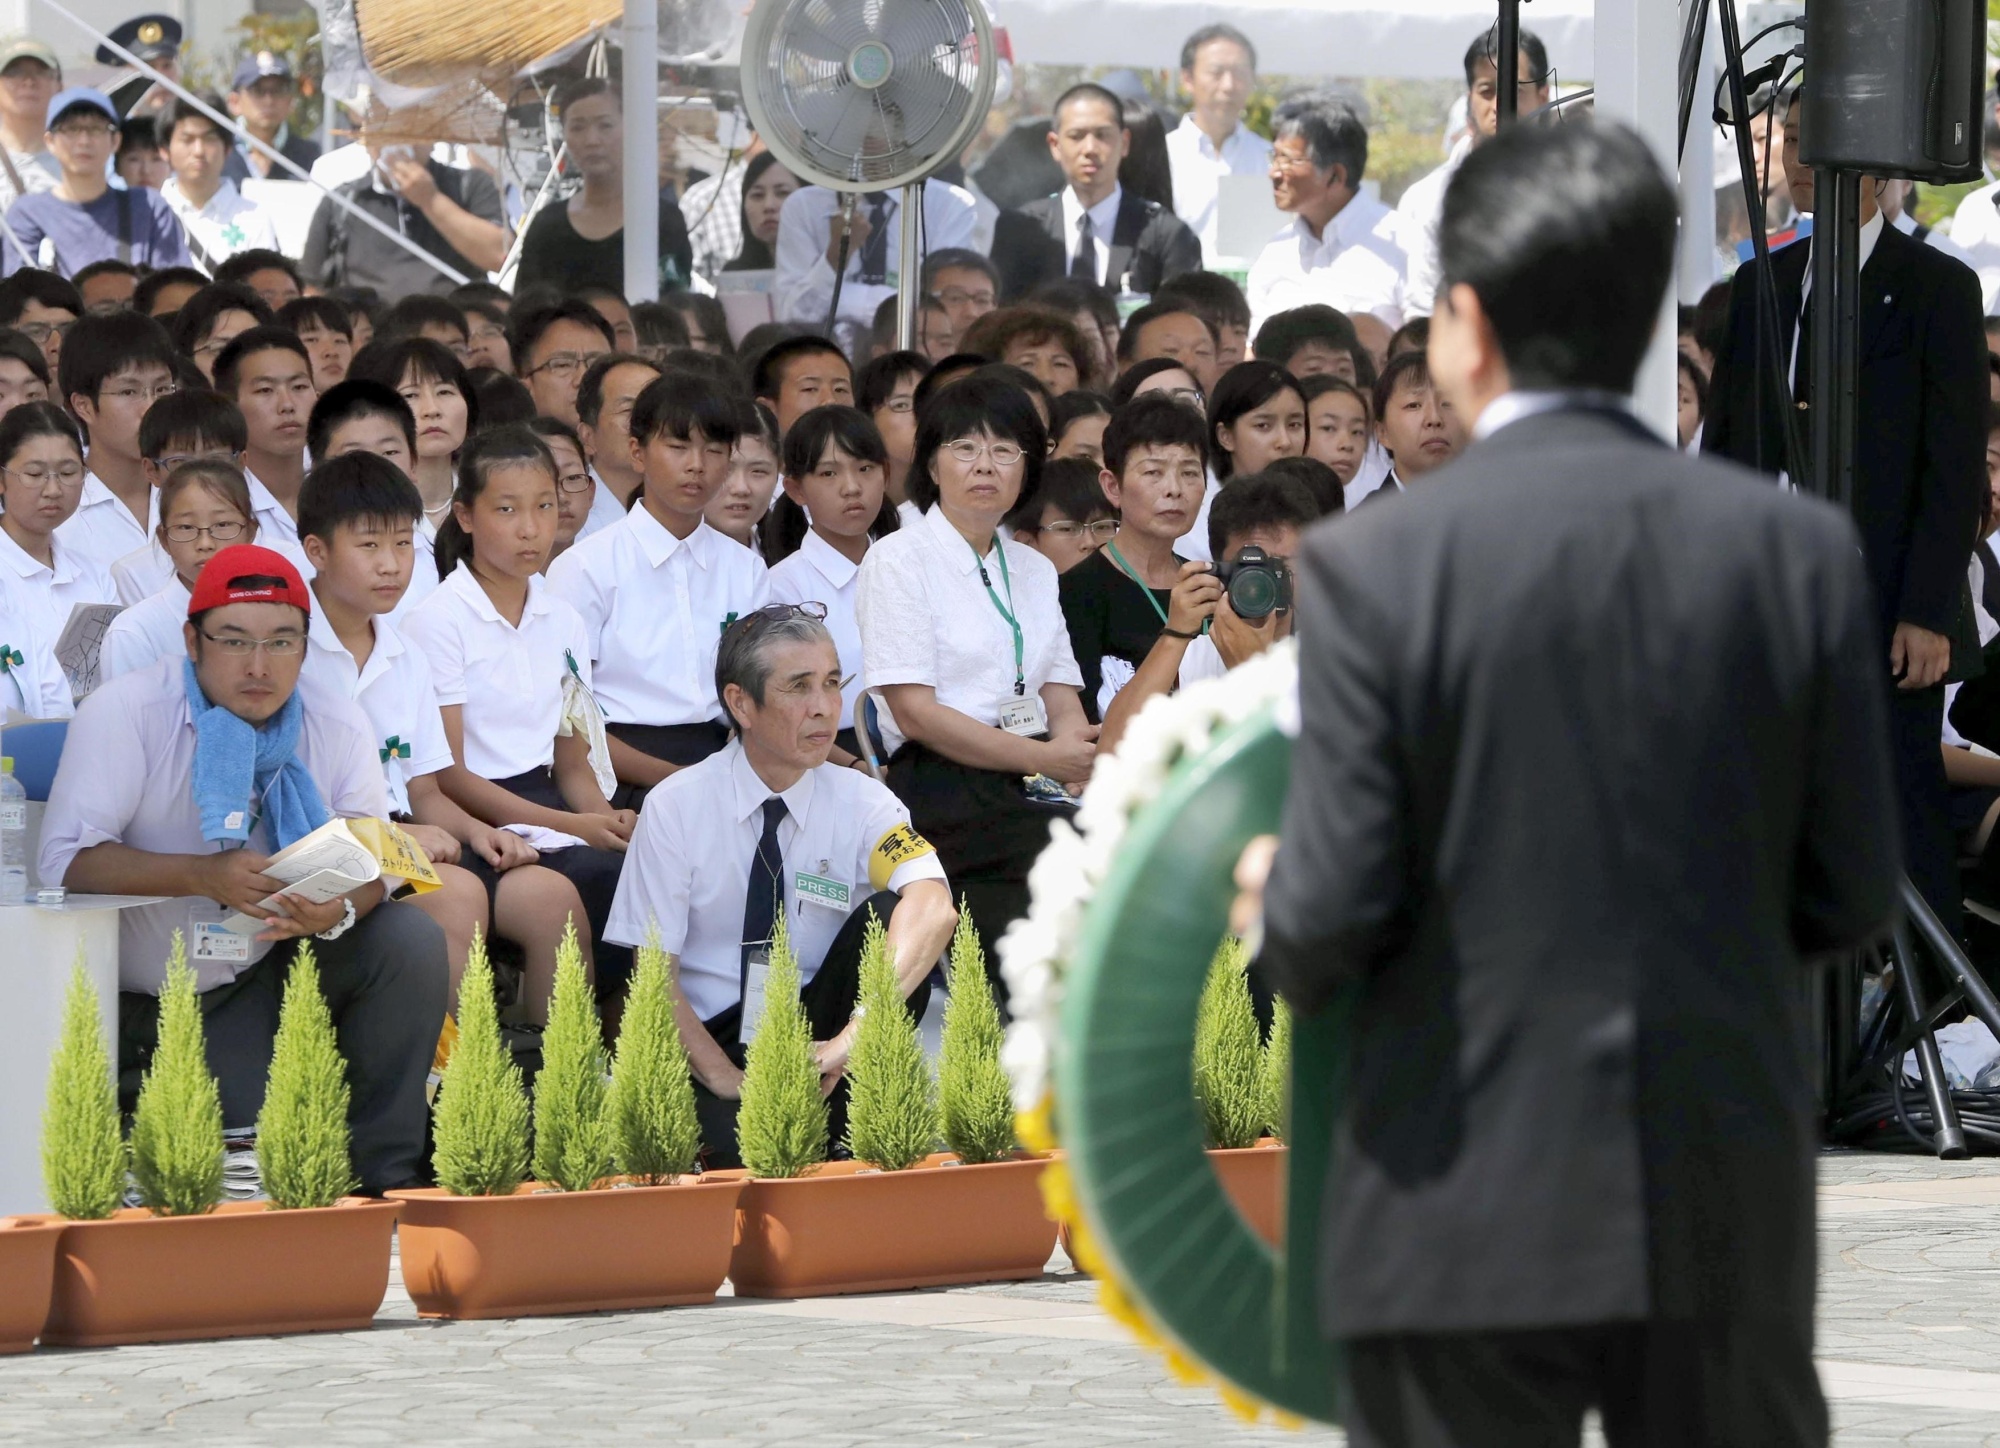 Attendees watch as Prime Minister Shinzo Abe presents a floral wreath Thursday at the annual ceremony to mark the 1945 atomic bombing of the city of Nagasaki. | KYODO